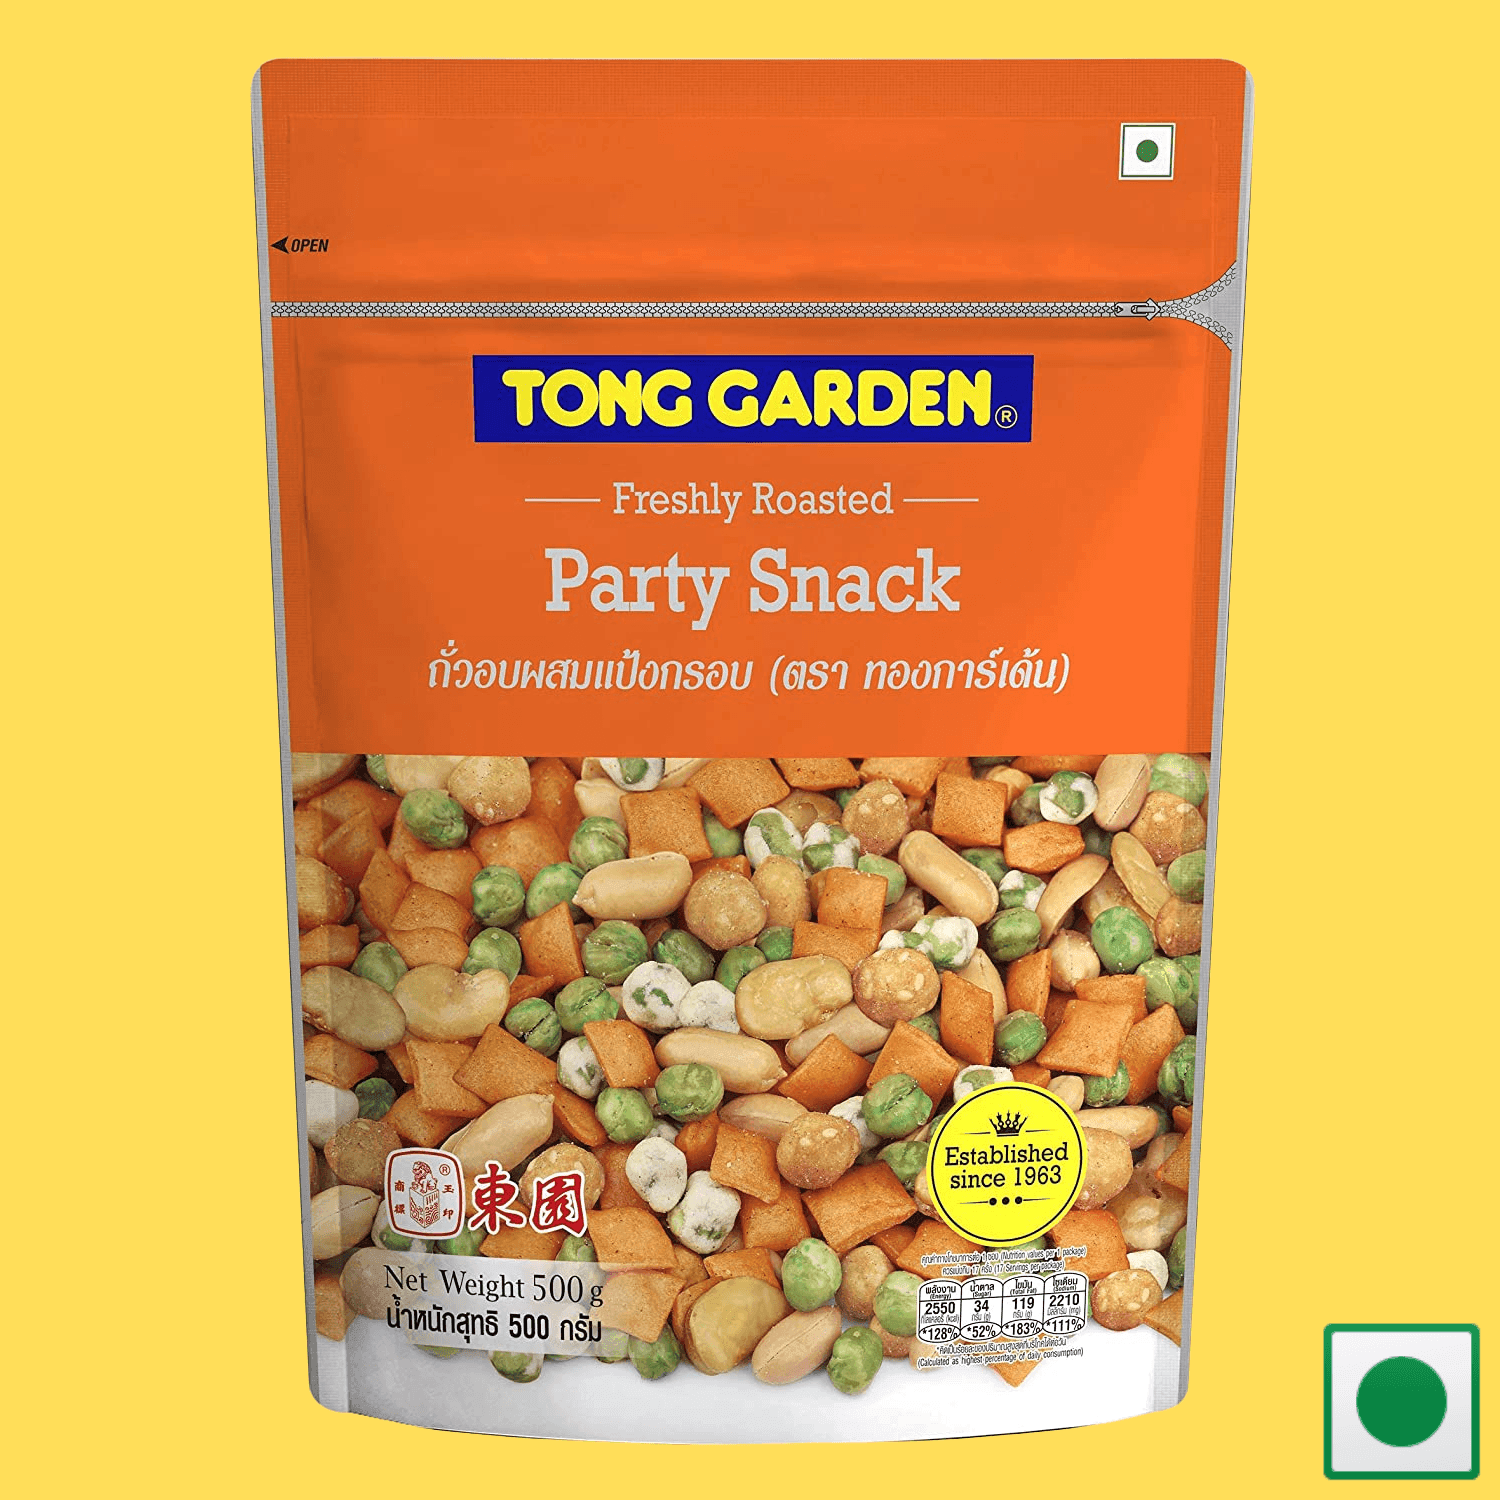 Tong Garden Party Snacks, 500g (Imported) - Super 7 Mart